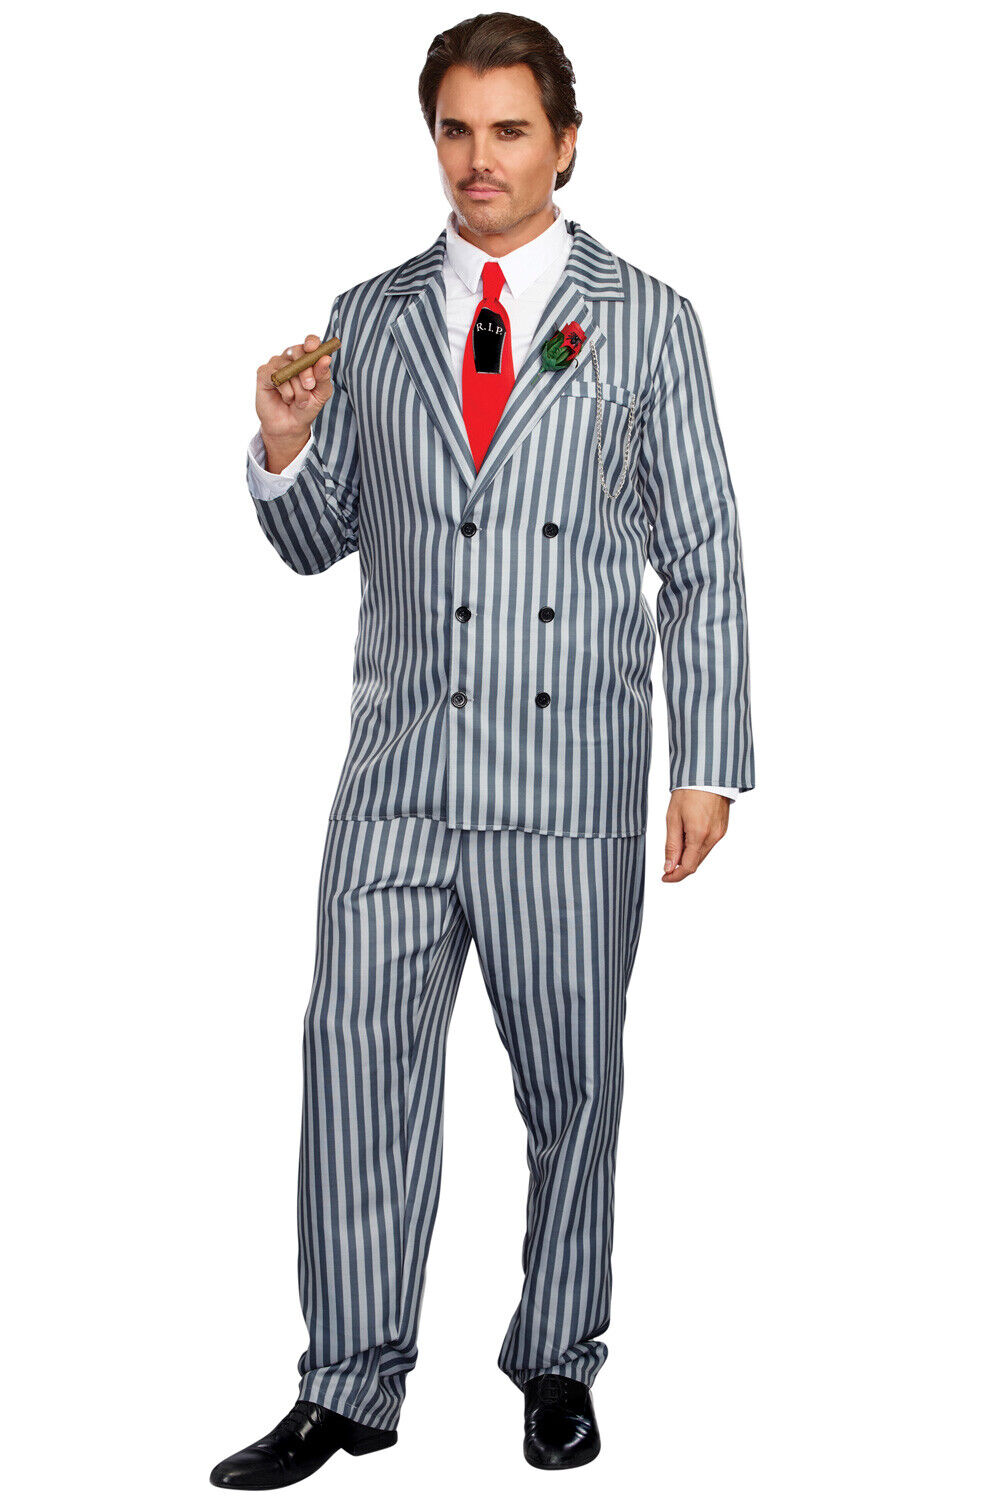 Brand New Addams Family Gomez Pin Stripe Suit Mr. Fright Adult Costume